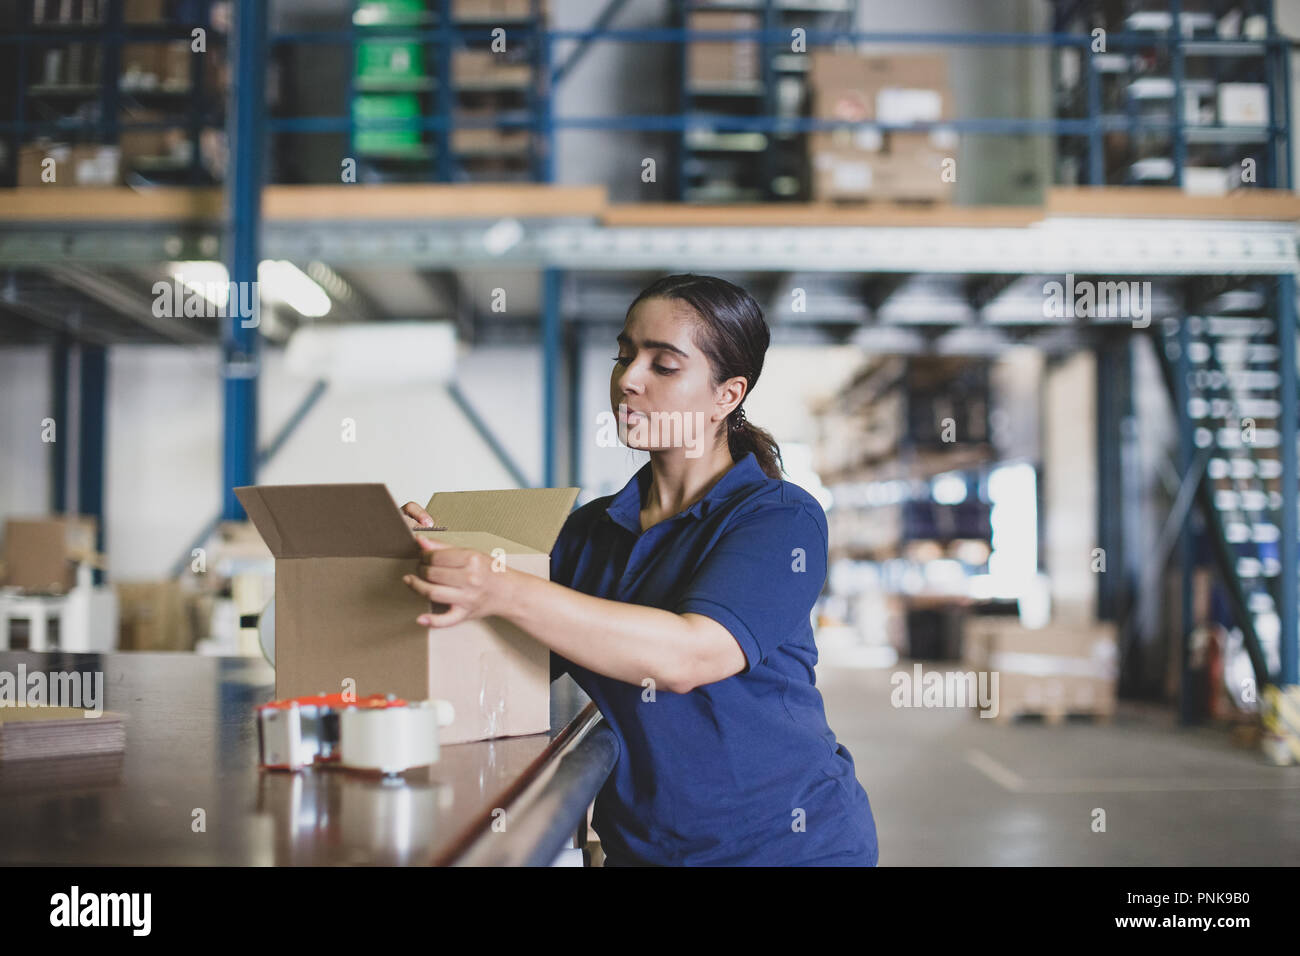 Female working in packing warehouse Stock Photo